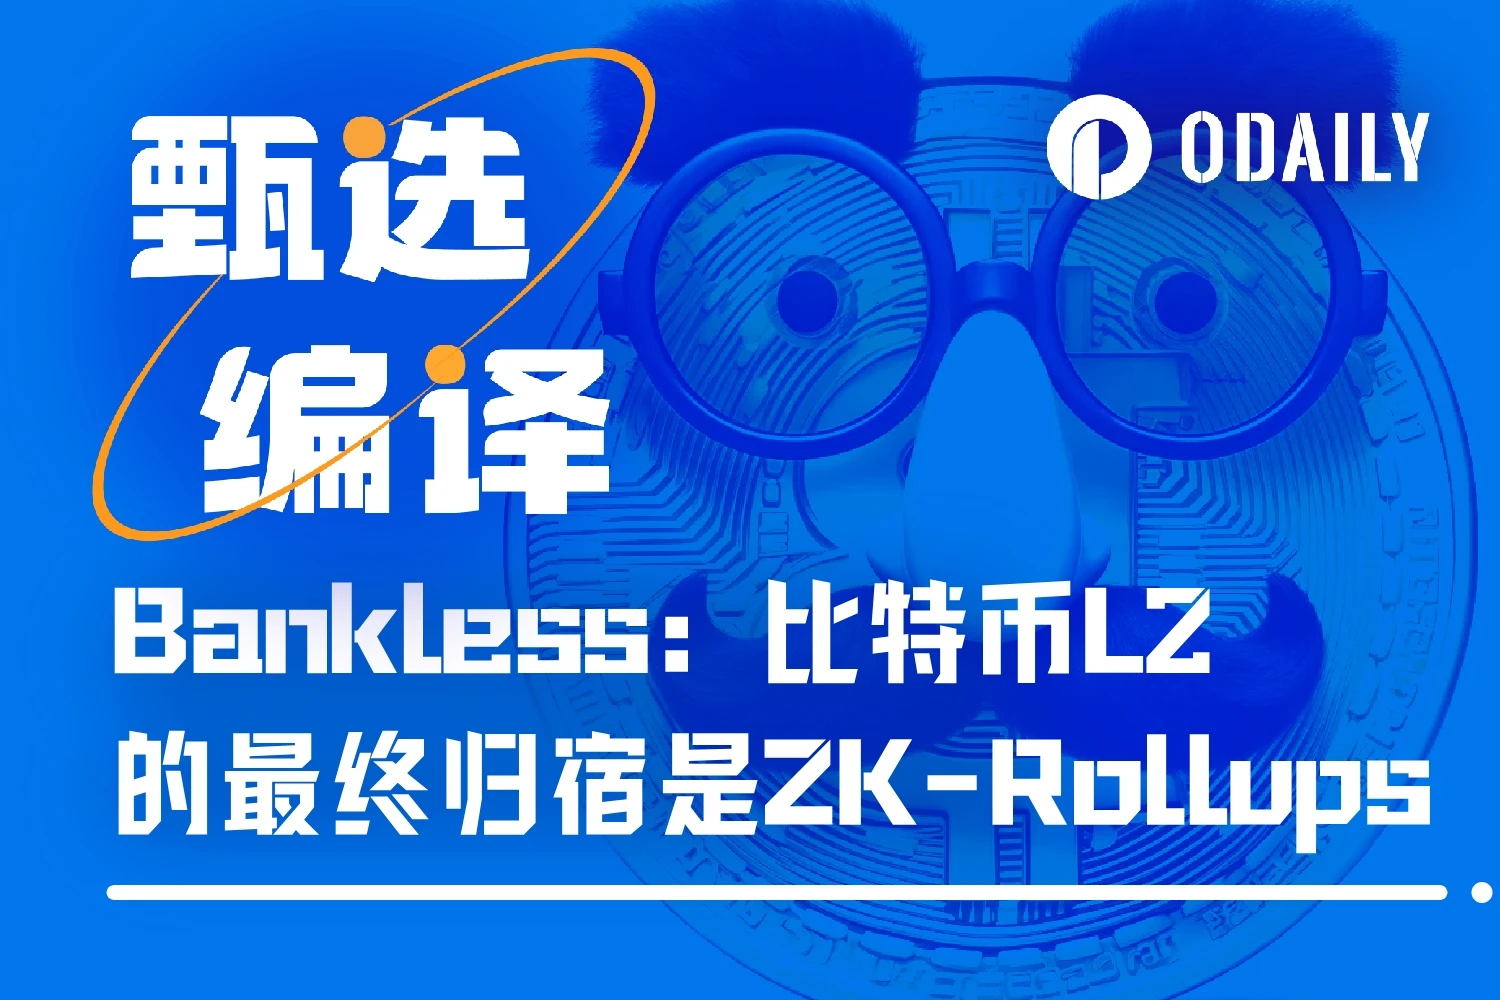 Bankless: The ultimate destination of Bitcoin L2 is ZK-Rollups